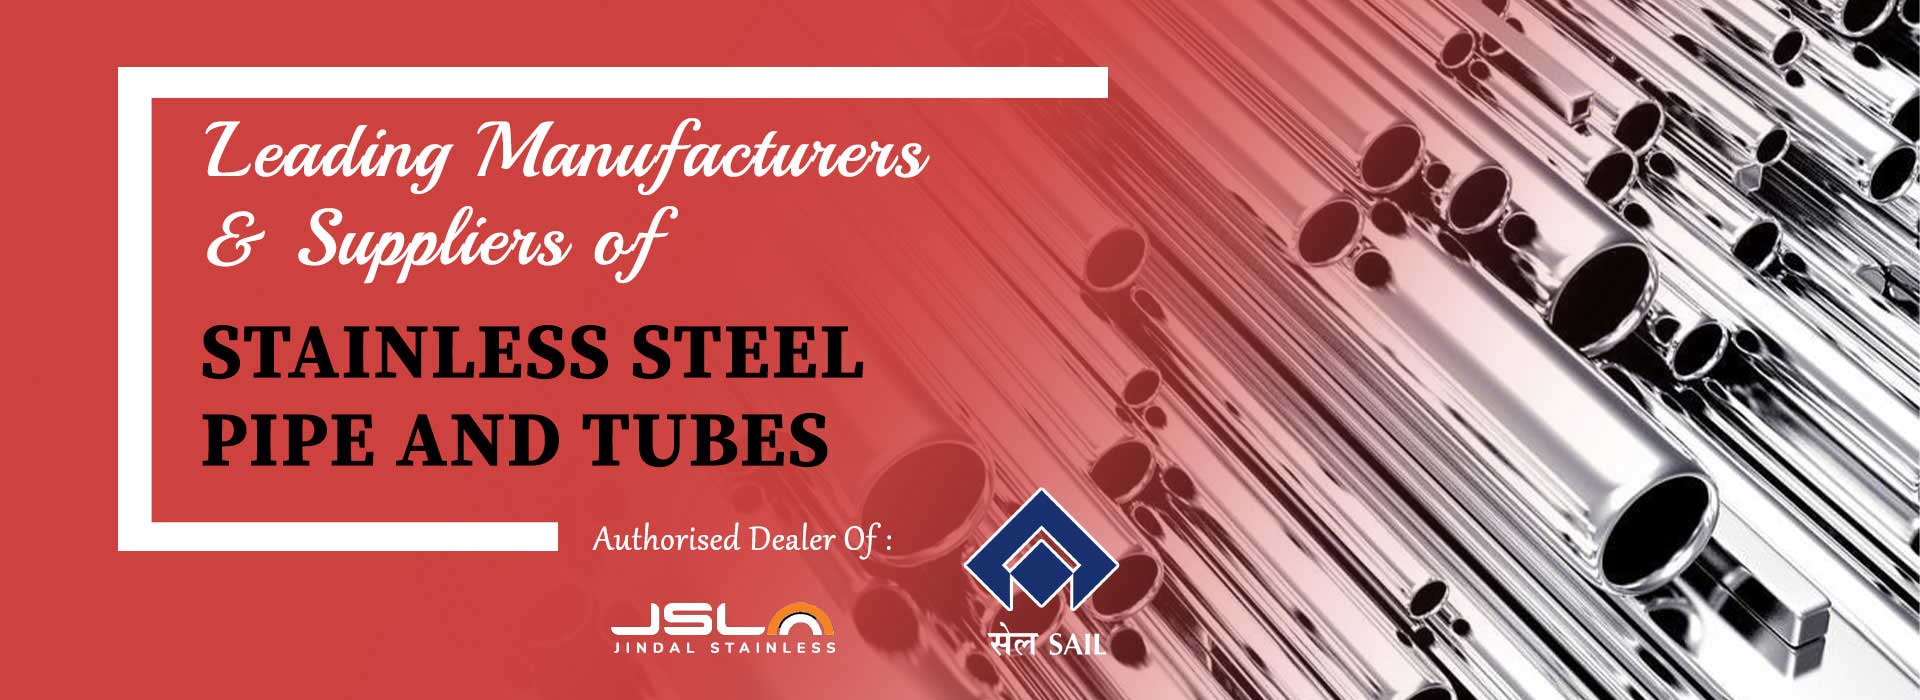 Stainless Steel Pipe and Tubes Manufacturers in Chandigarh